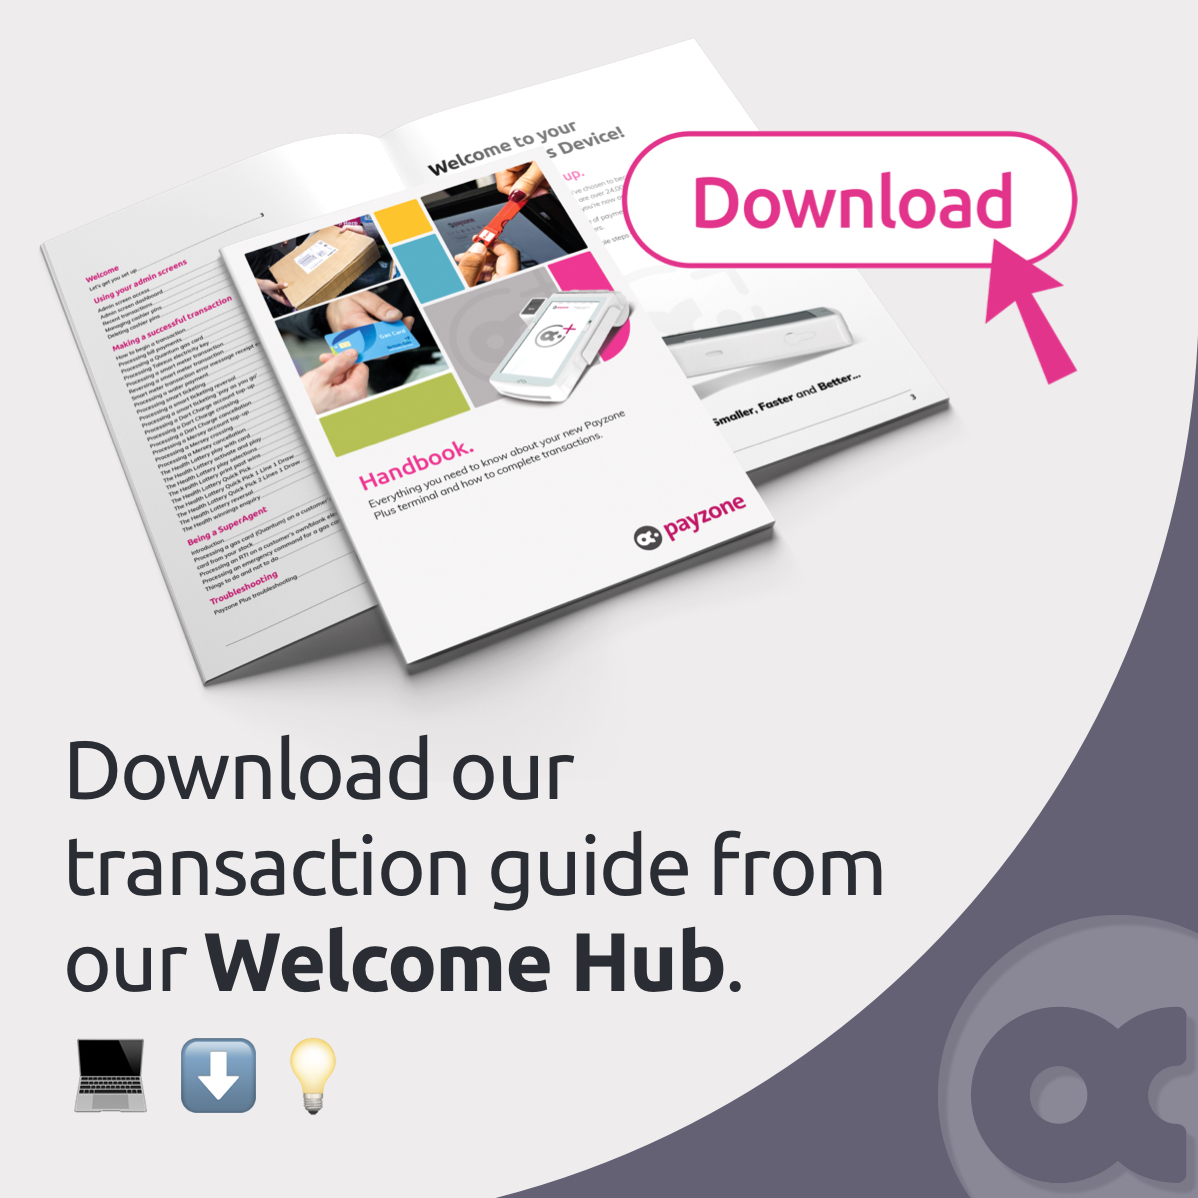 Unsure what services you can provide to customers with your Payzone terminal? Download our Services Guide from the Welcome Hub for a complete list ⬇️ ow.ly/hrYg50PFmKh #payzonetips